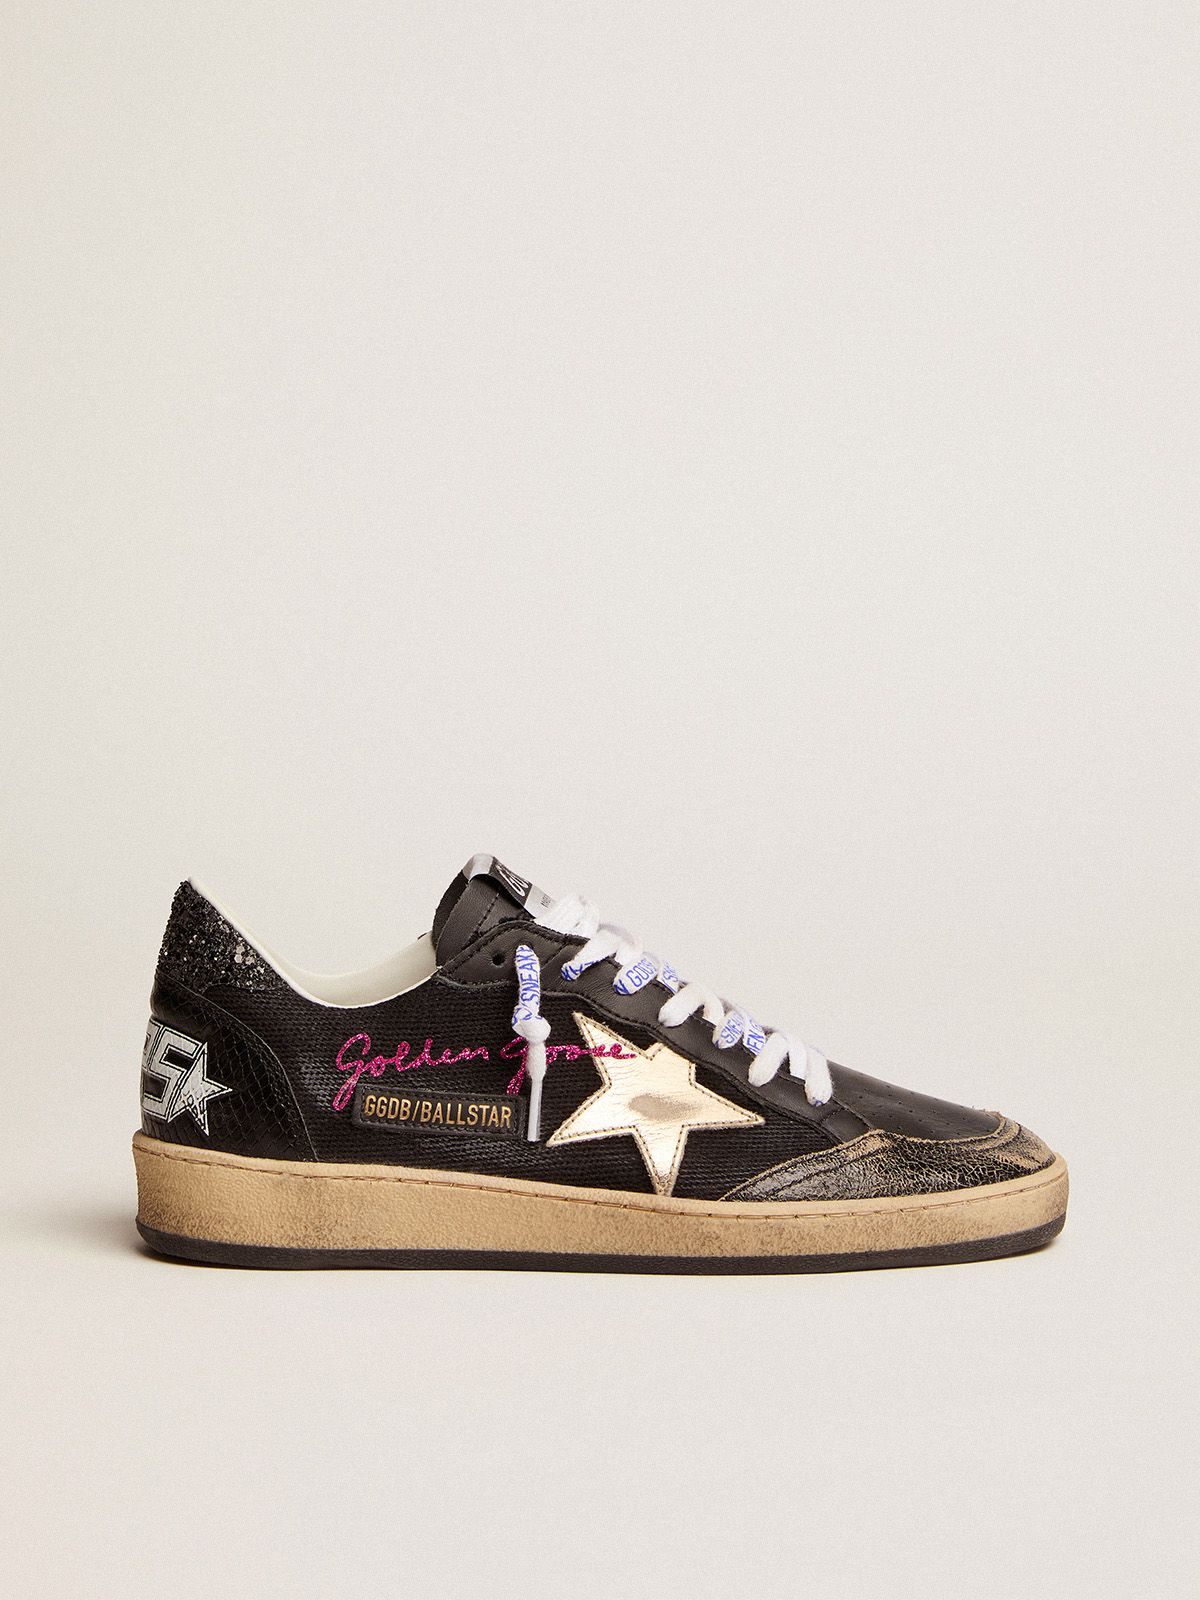 Golden Goose Sneakers Donna Ball Star sneakers in black canvas with platinum metallic leather star and black glitter heel tab